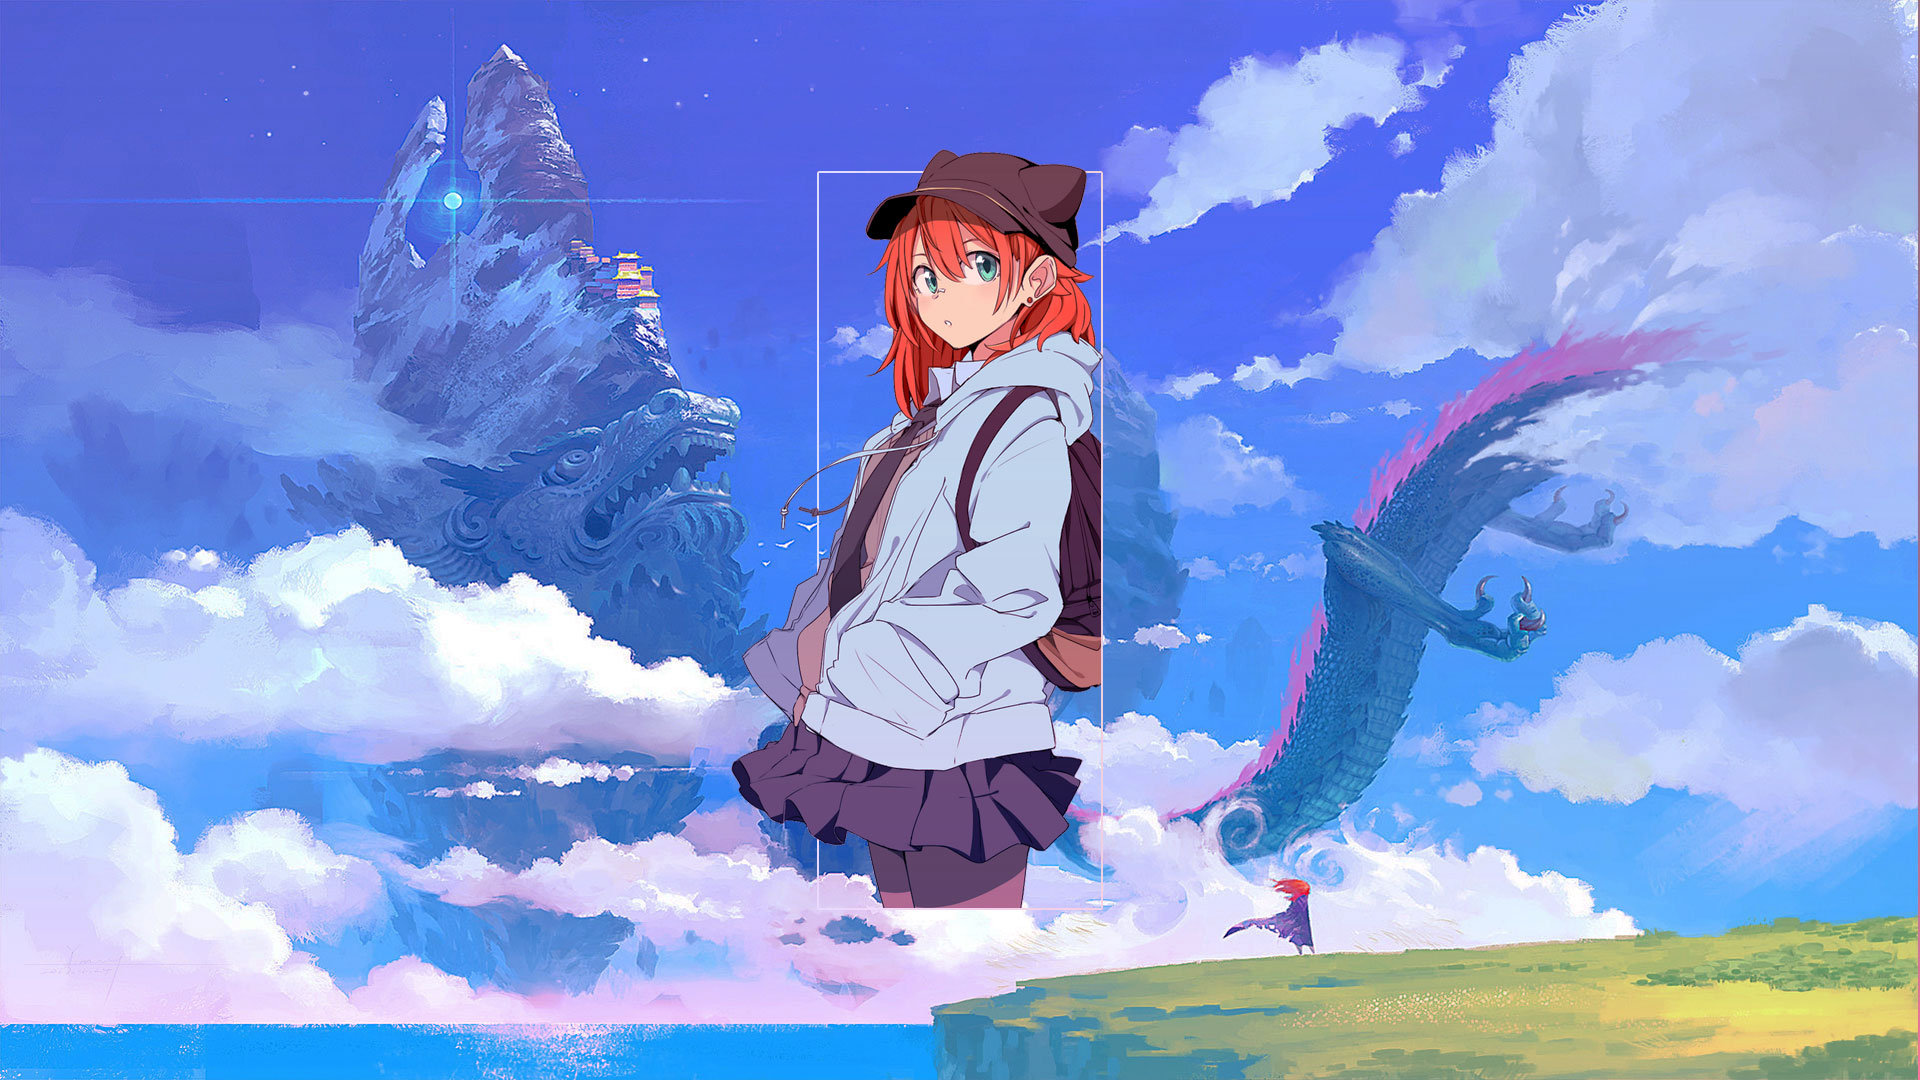 Anime Anime Girls Landscape Photoshop Digital Art Picture In Picture Sky Clouds Dragon Sea Abstract  1920x1080